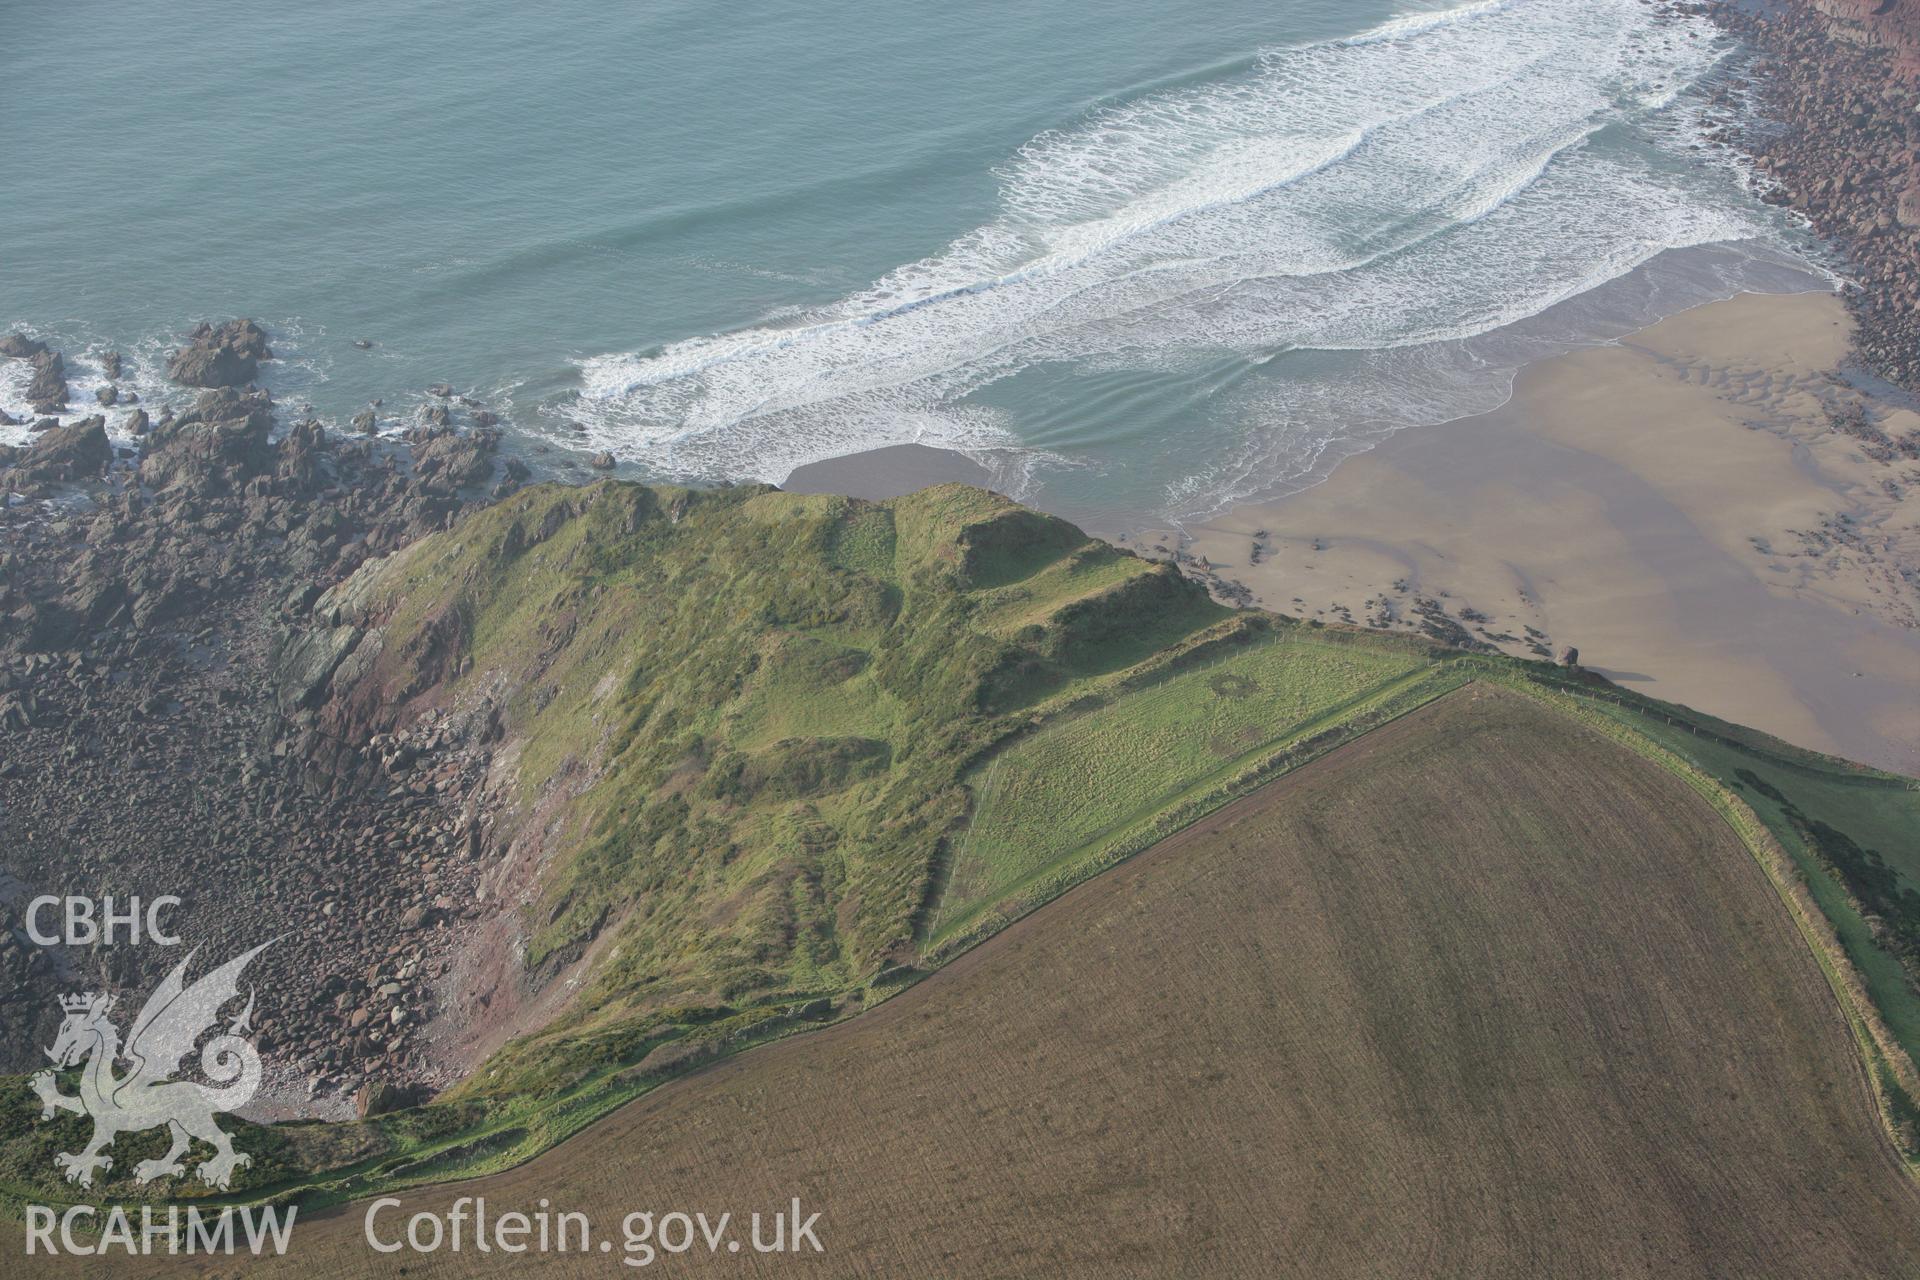 RCAHMW colour oblique aerial photograph of Great Castle Head Promontory Fort. Taken on 28 January 2009 by Toby Driver